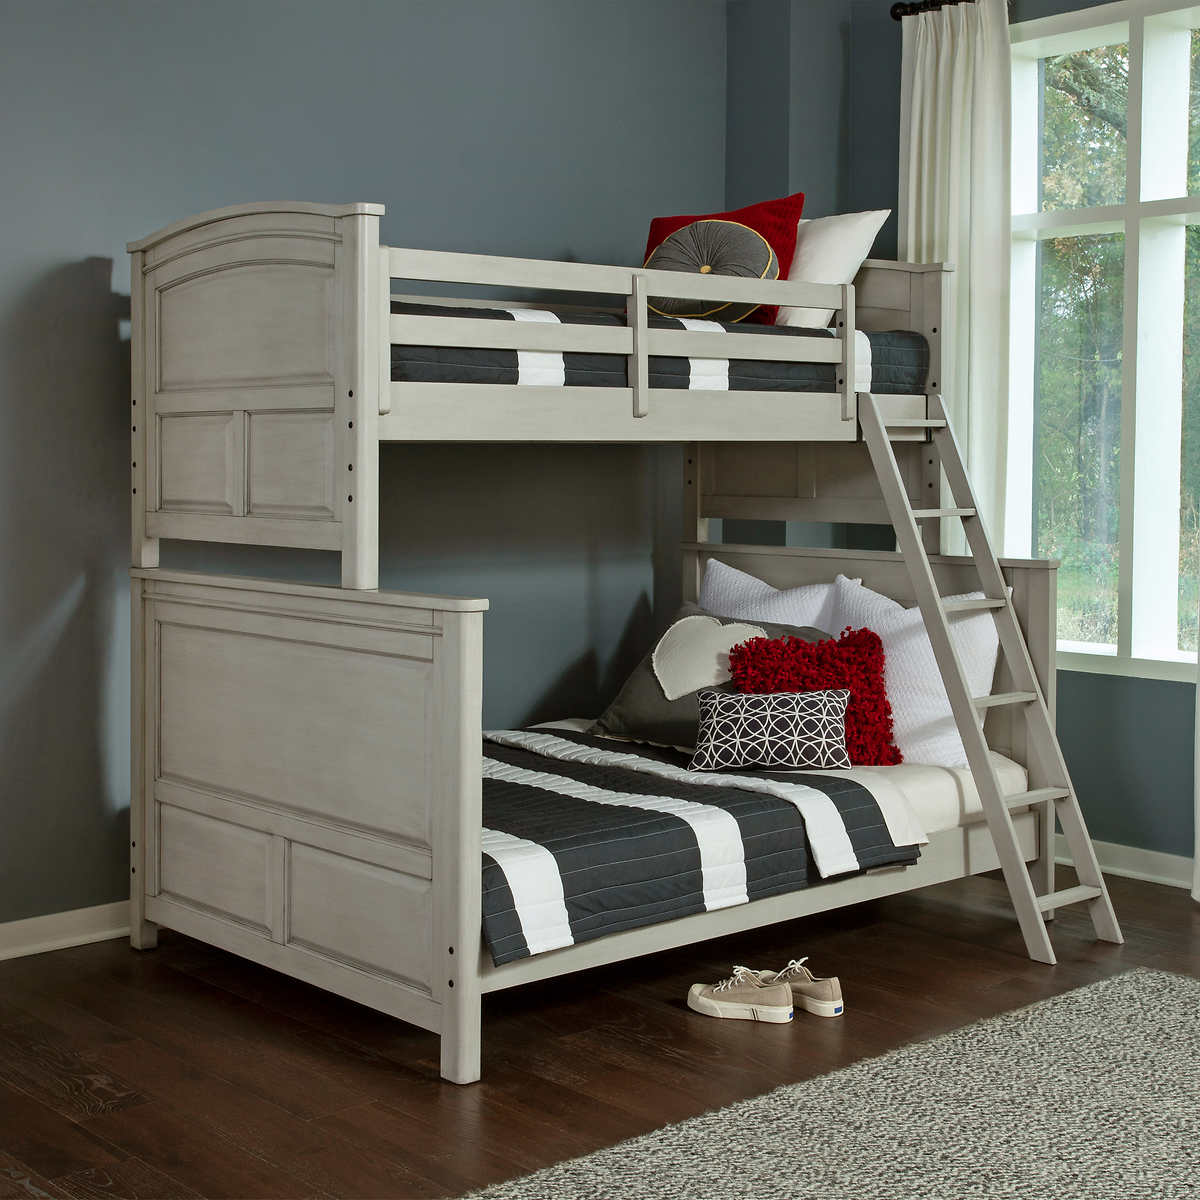 Wingate Twin Over Full Bunk Bed Costco, Twin Over Full Bunk Bed With Mattress Included